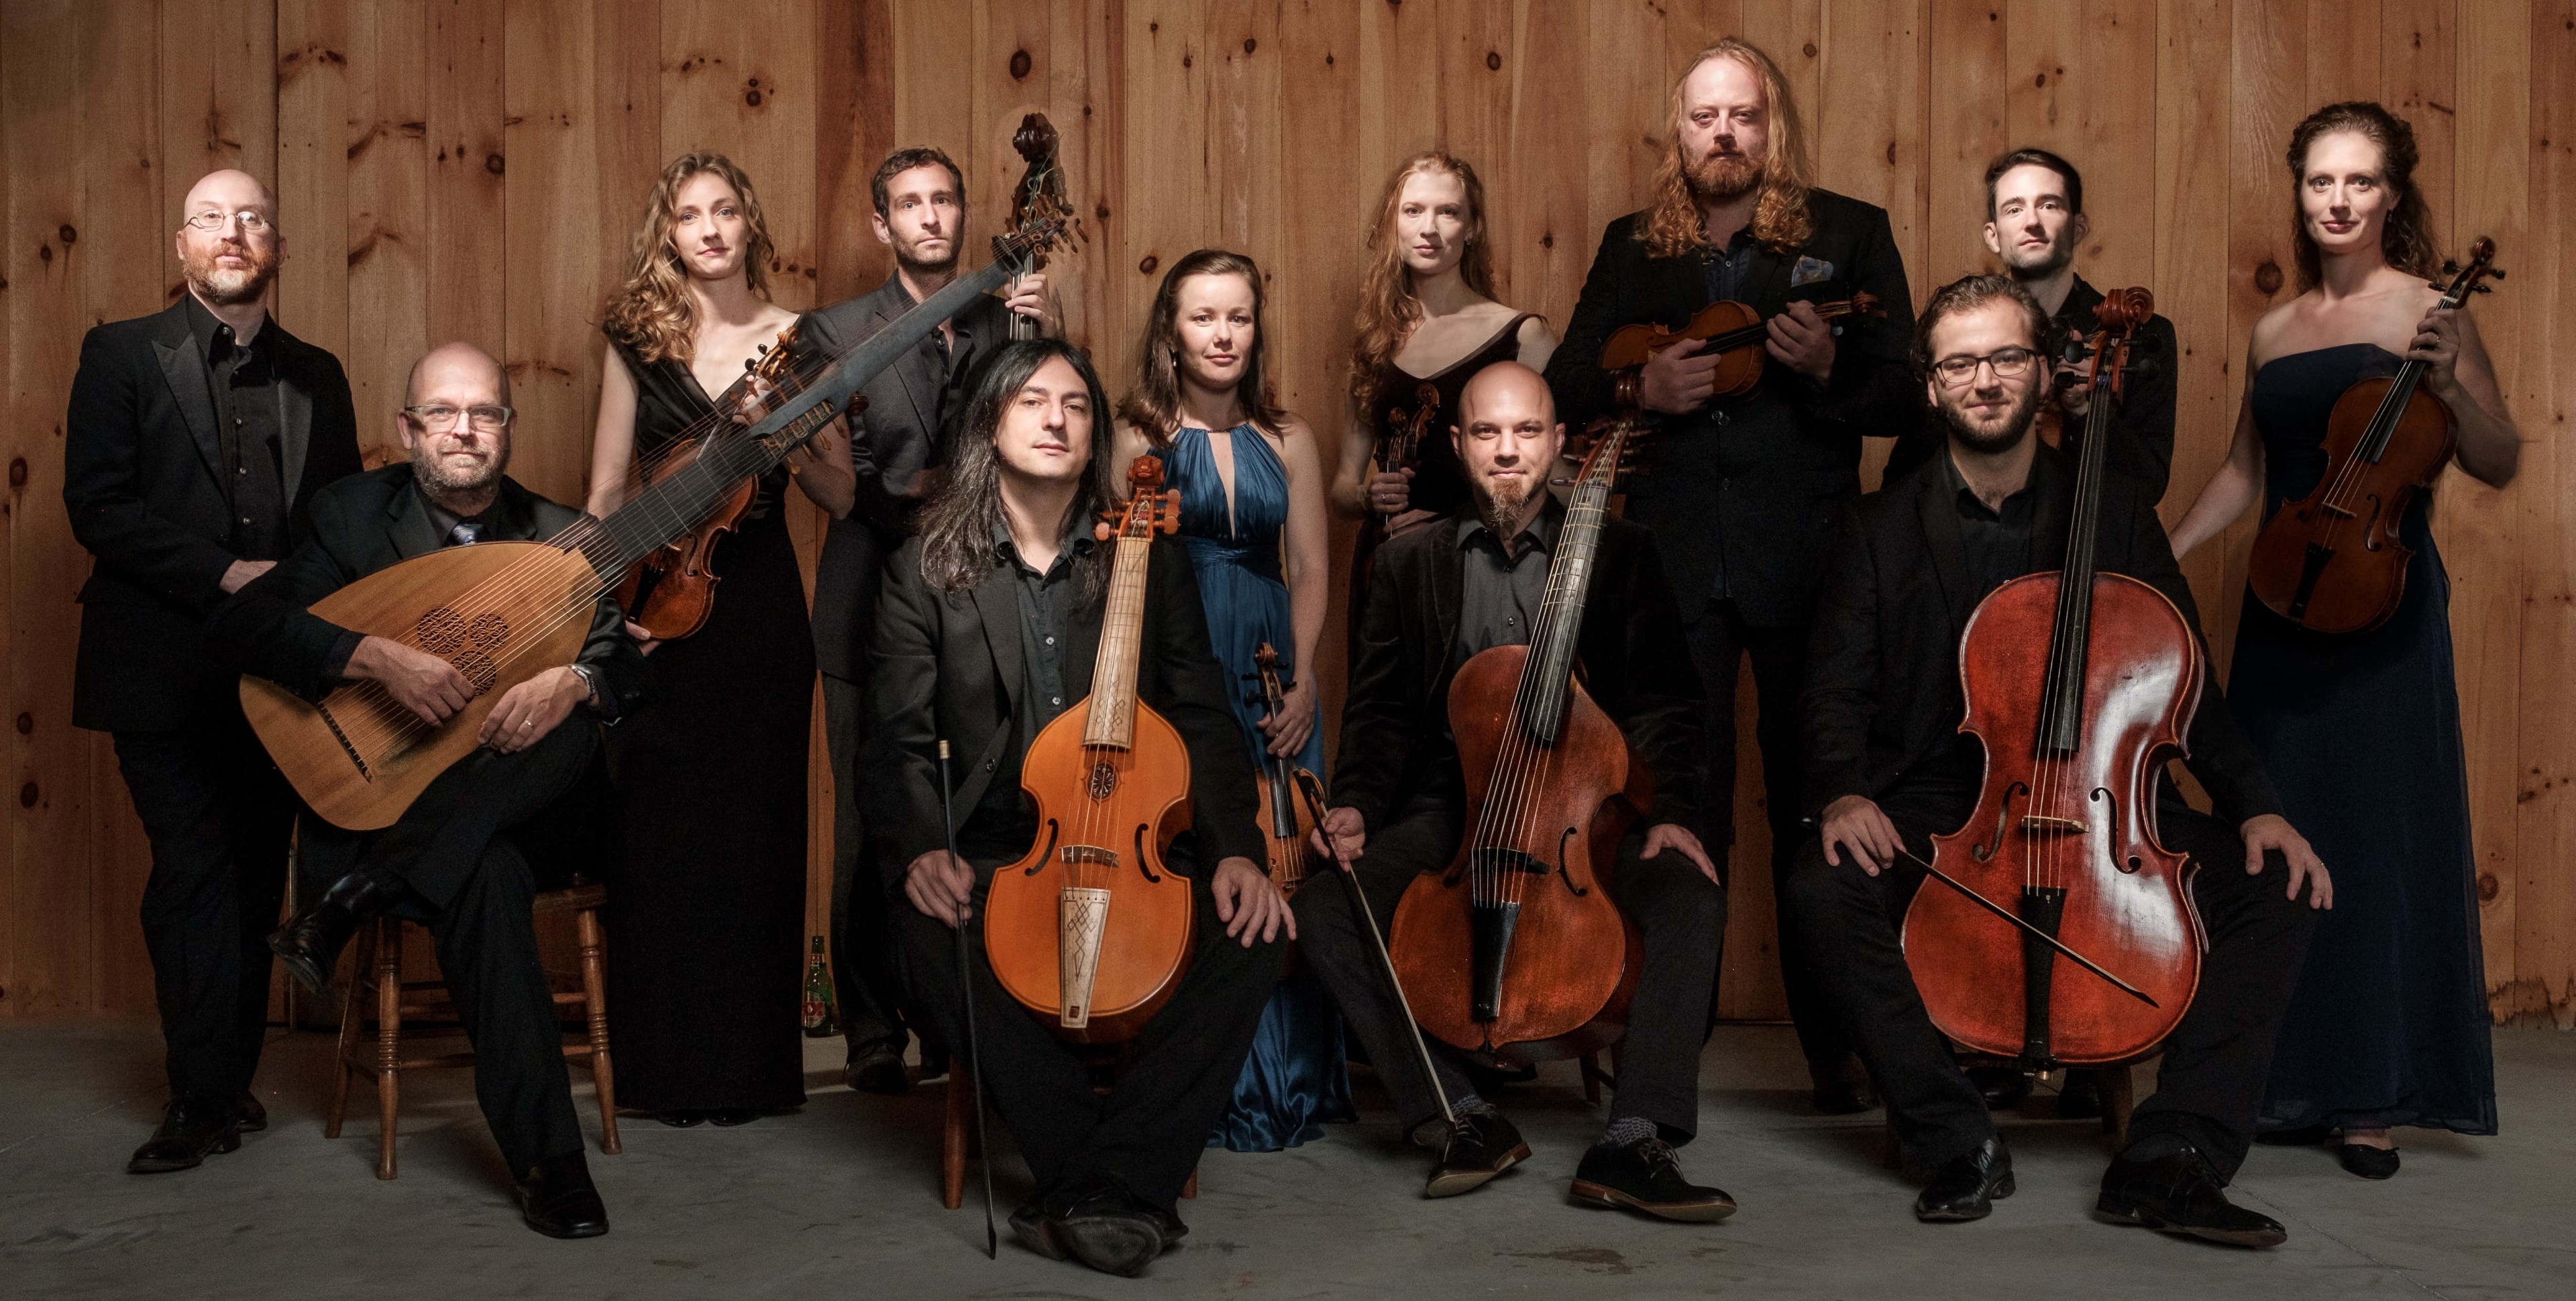 Kivie Cahn-Lipman, assistant professor of Cello in the Dana School of Music, pictured fifth from the left, is the director of ACRONYM, a baroque ensemble founded in 2012 that made its European debut this past summer in the Netherlands at the Utrecht Early Music Festival. The group will record its 10th  album after performing at the "Music Before 1800" series in New York in October.